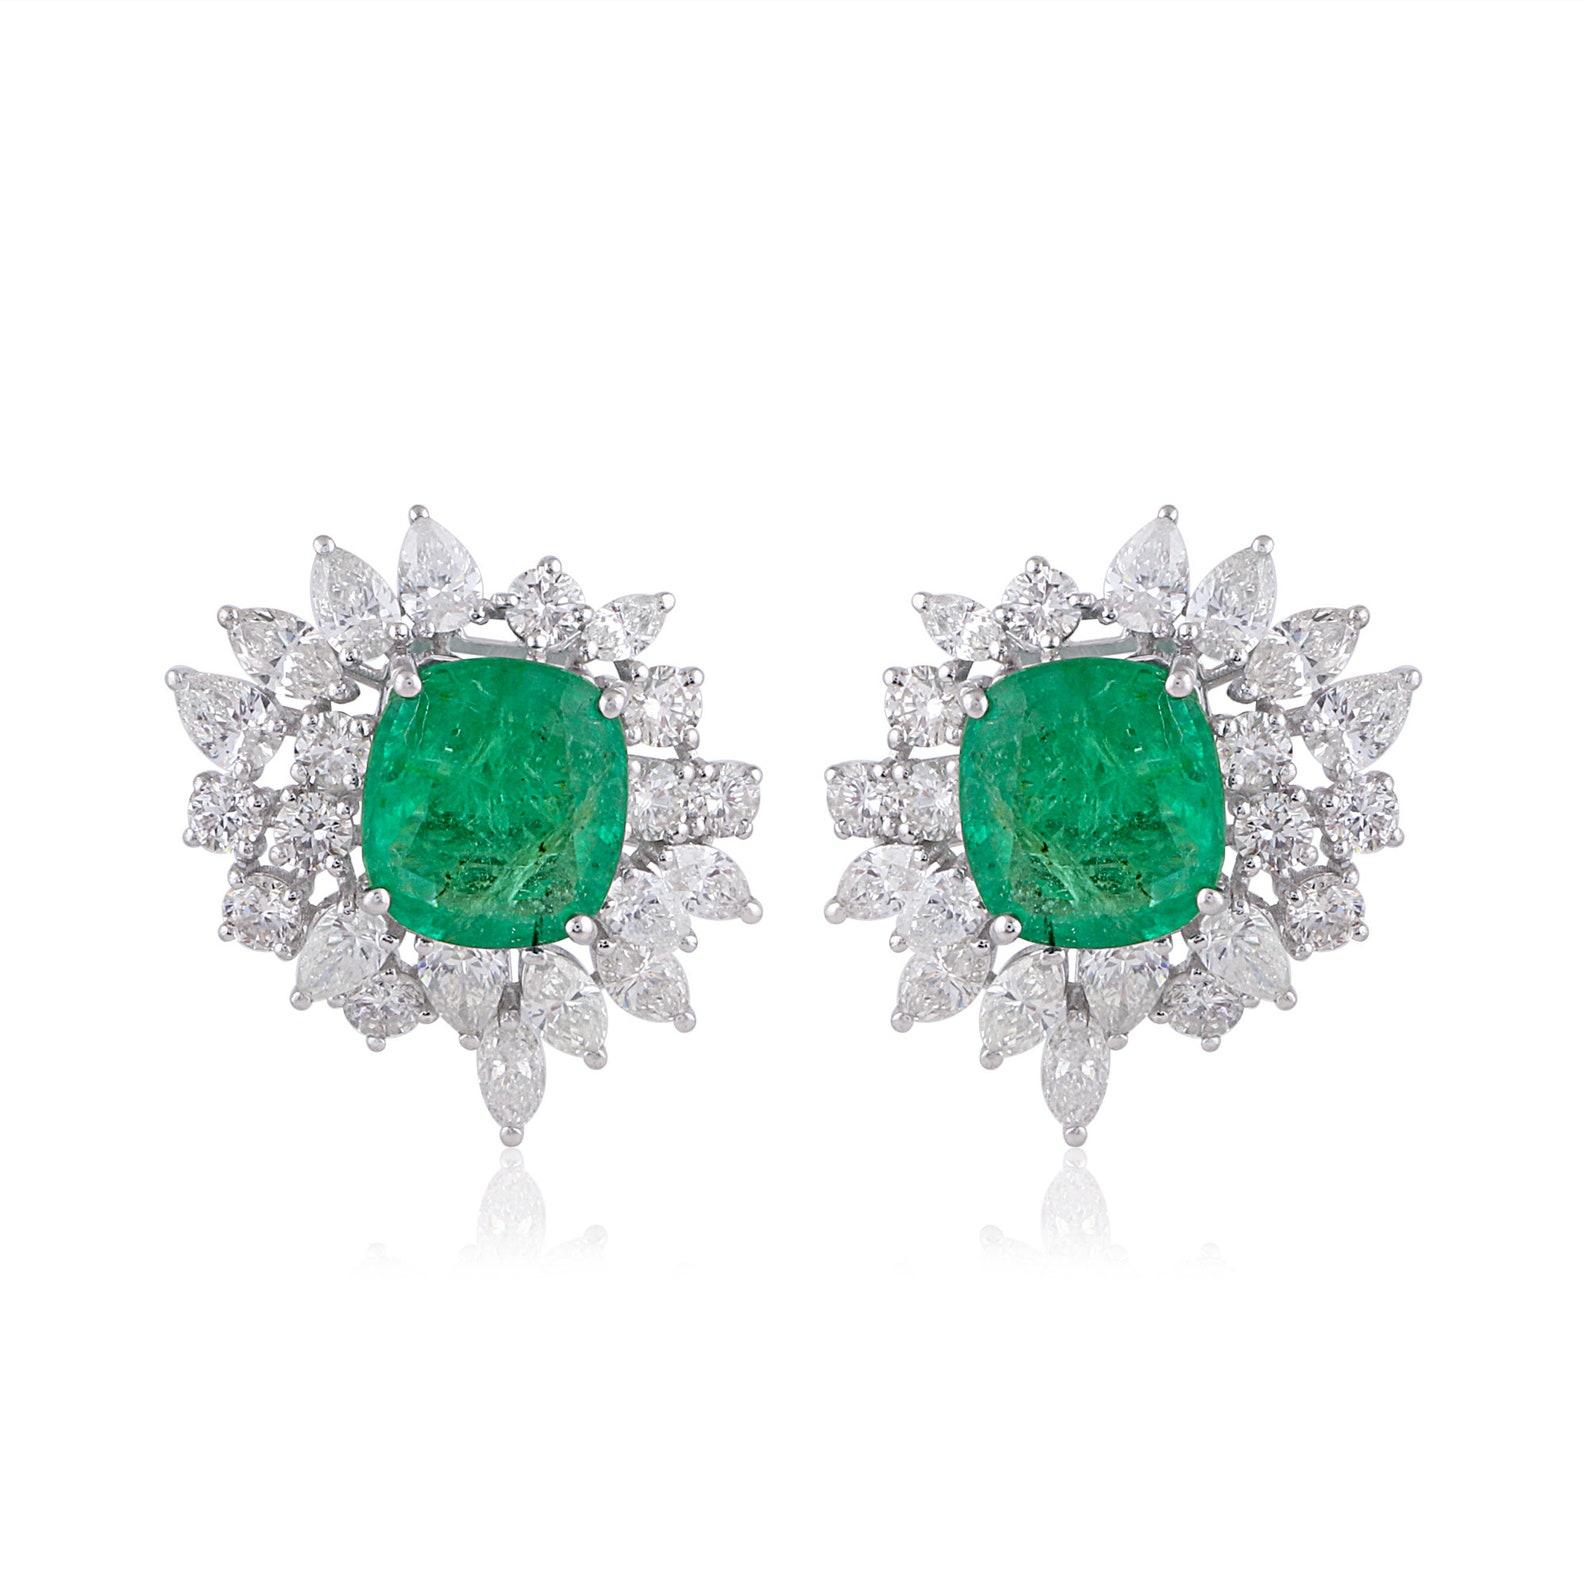 Cast in 14 karat gold, these stunning stud earrings are hand set with 6.26 carats emerald and 4.70 carats of glimmering diamonds. 

FOLLOW MEGHNA JEWELS storefront to view the latest collection & exclusive pieces. Meghna Jewels is proudly rated as a